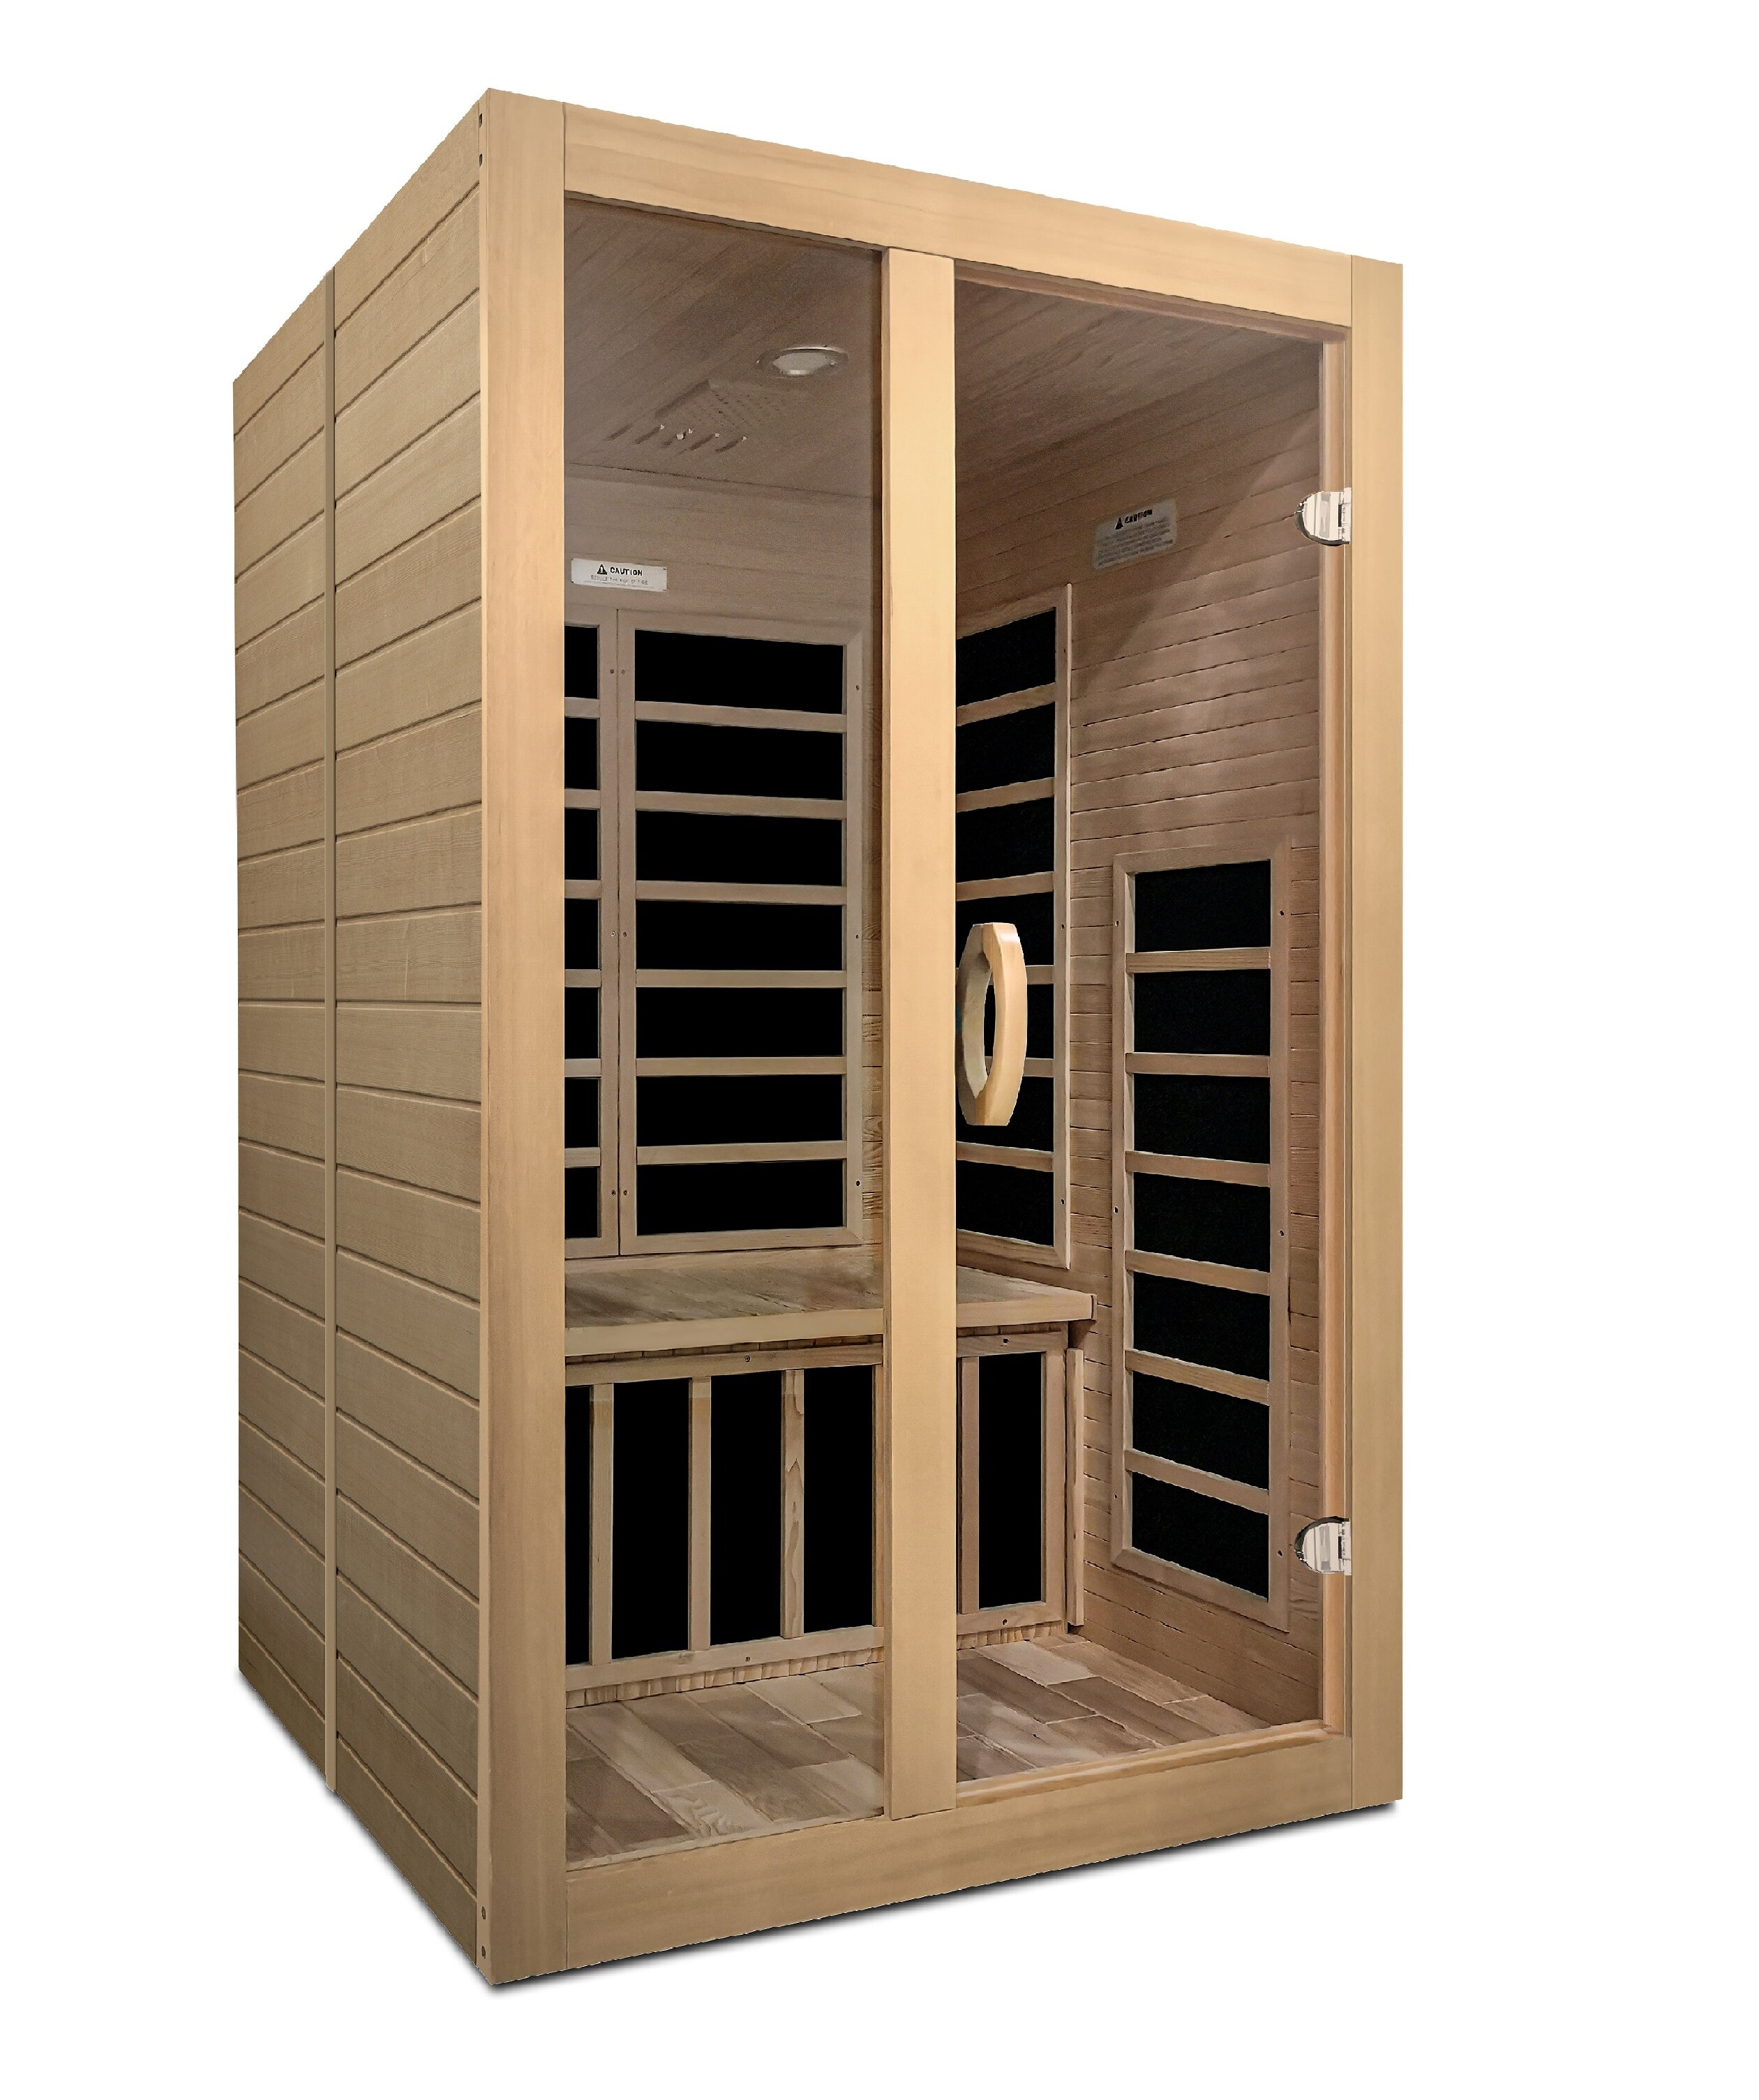 Backrests 7 Color Therapy Light 6 Infra-Wave Carbon Composite Heaters Built In MP3//AUX//CD//FM Stereo with Speakers Robe Hooks and Magaz Superior Cedar Construction for the Highest Quality Spa Experience Hanko 2 Person Pre-Built FAR Infrared Sauna